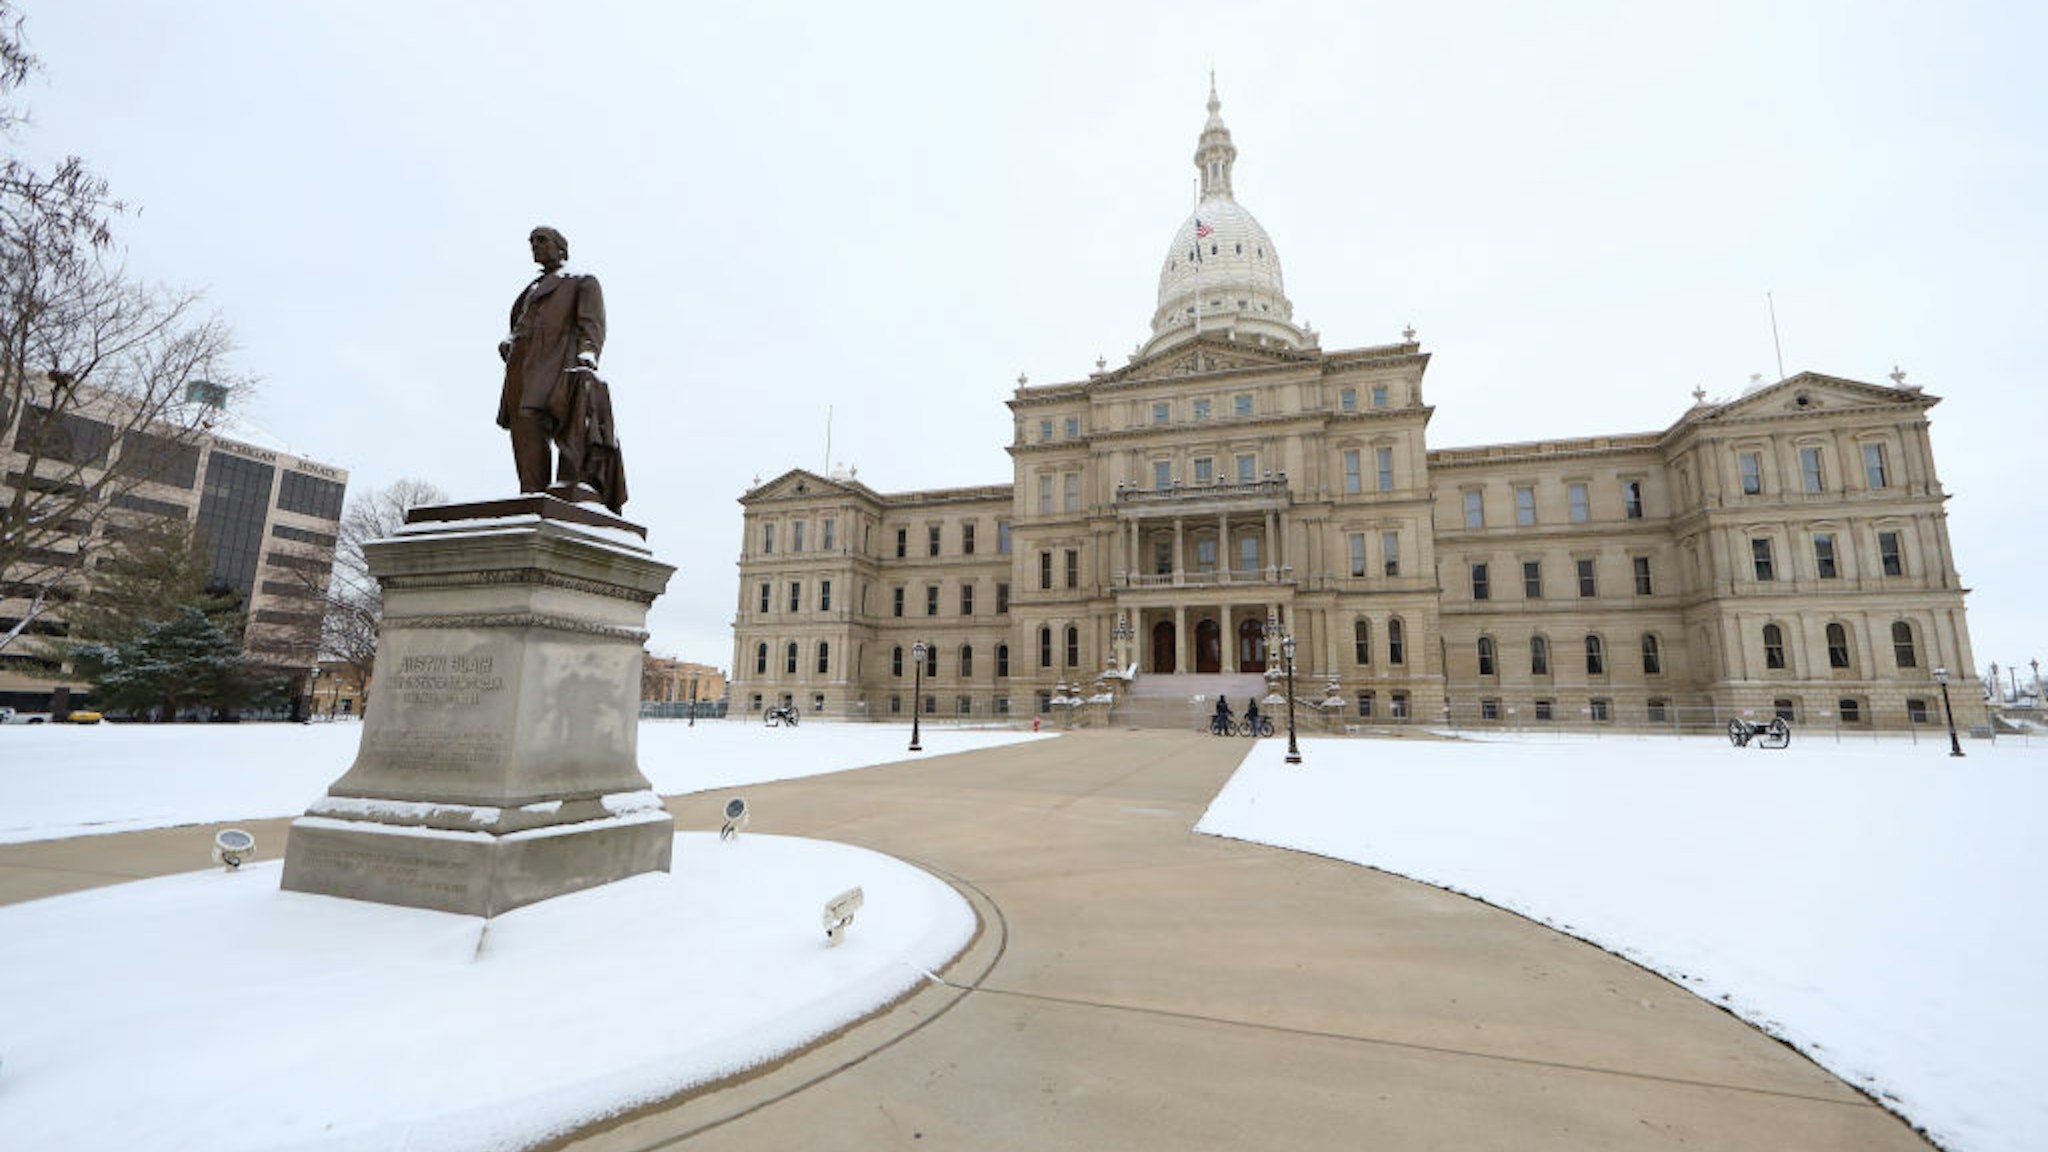 LANSING, MI - JANUARY 20: Michigan state police patrol the grounds outside the Michigan state capitol building on January 20, 2021 in Lansing, Michigan. State capitols across the country have activated National Guard members and police to prepare for demonstrations by right-wing groups, as Joe Biden is sworn in as the 46th president of the United States at today's inauguration ceremony in Washington, DC. (Photo by Rey Del Rio/Getty Images)